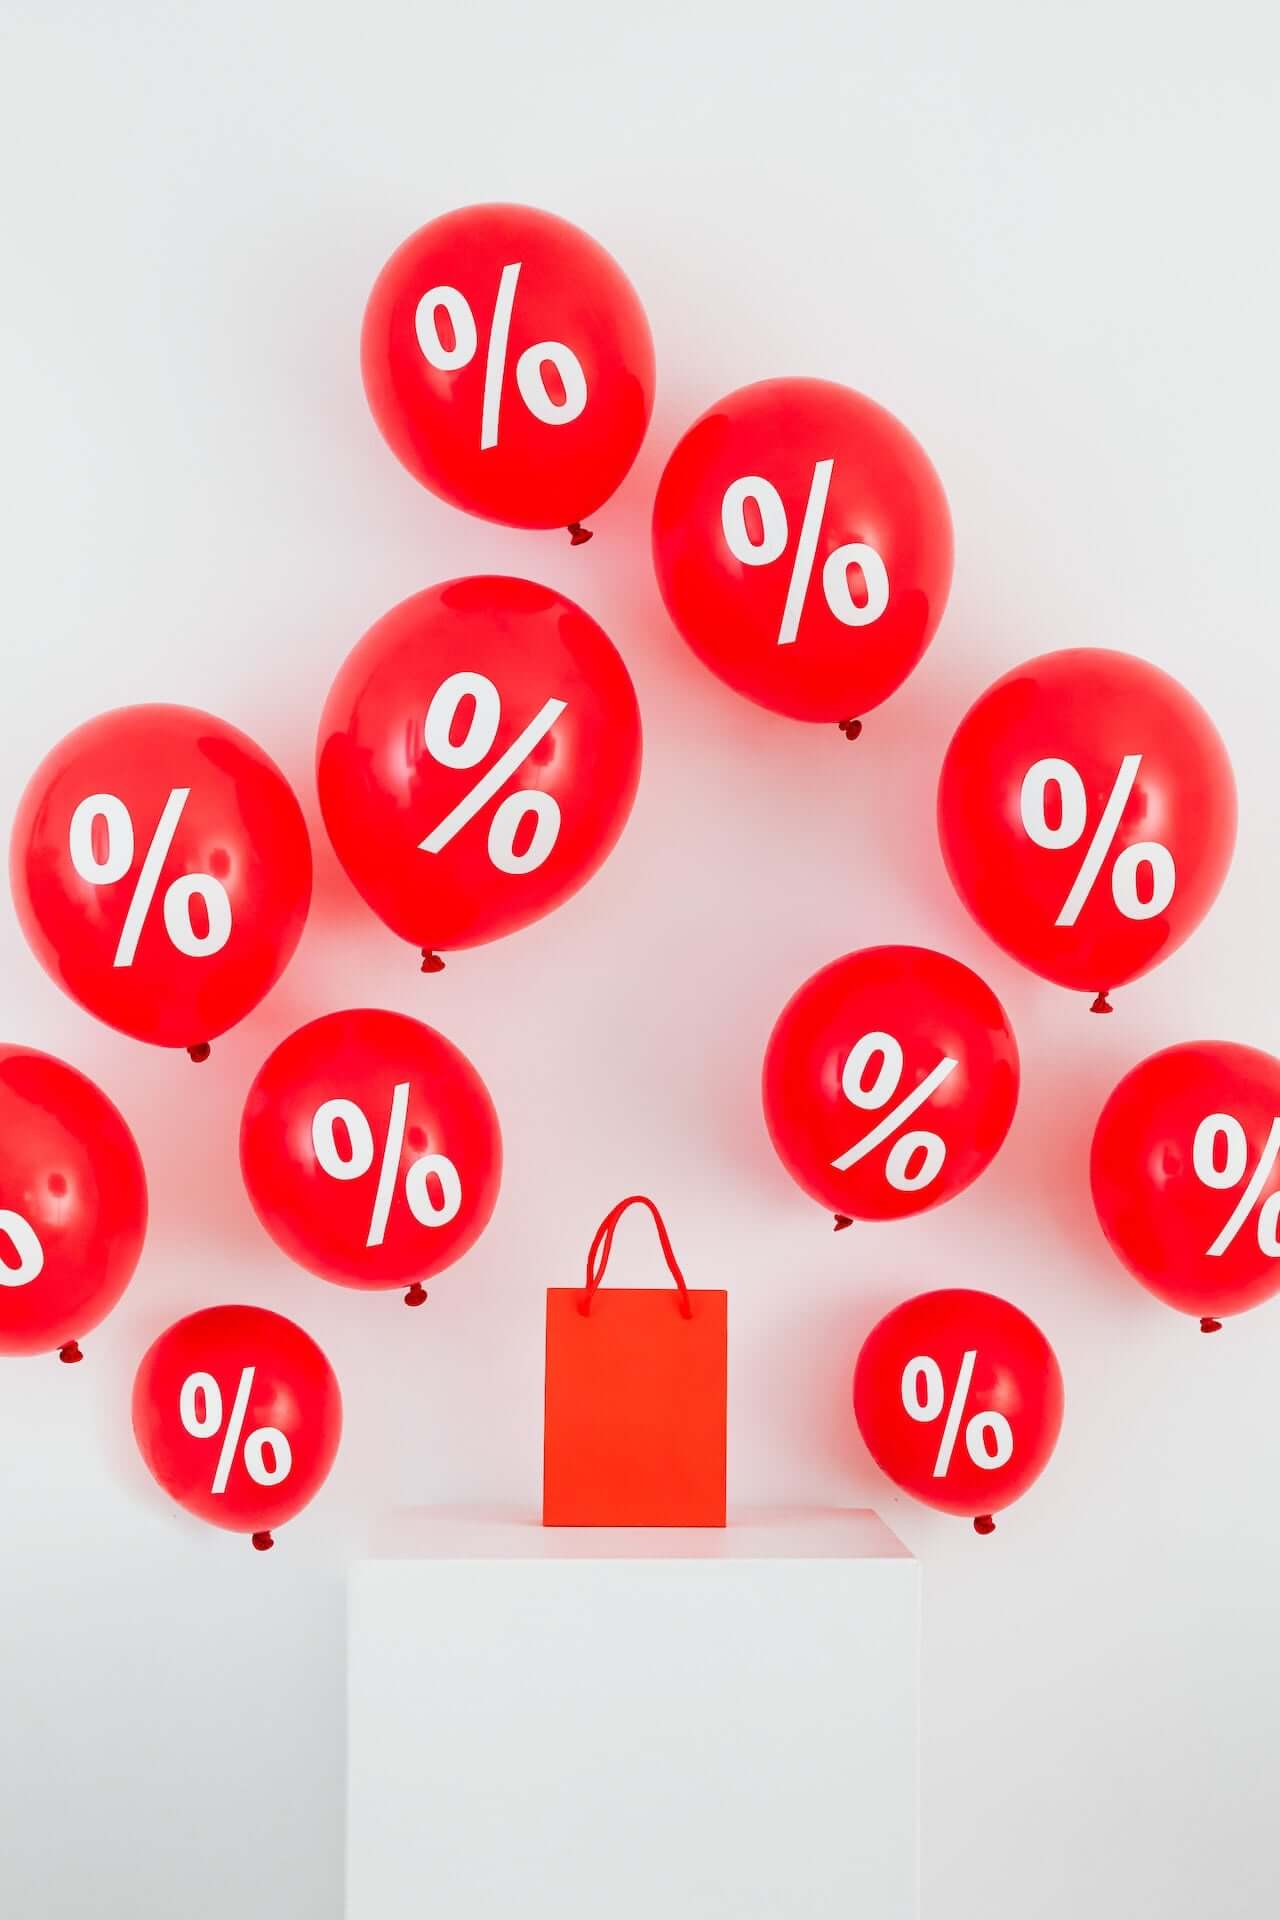 Mastering the Art of Online Shopping: Discount Strategies and More Tips | DiscountCode365